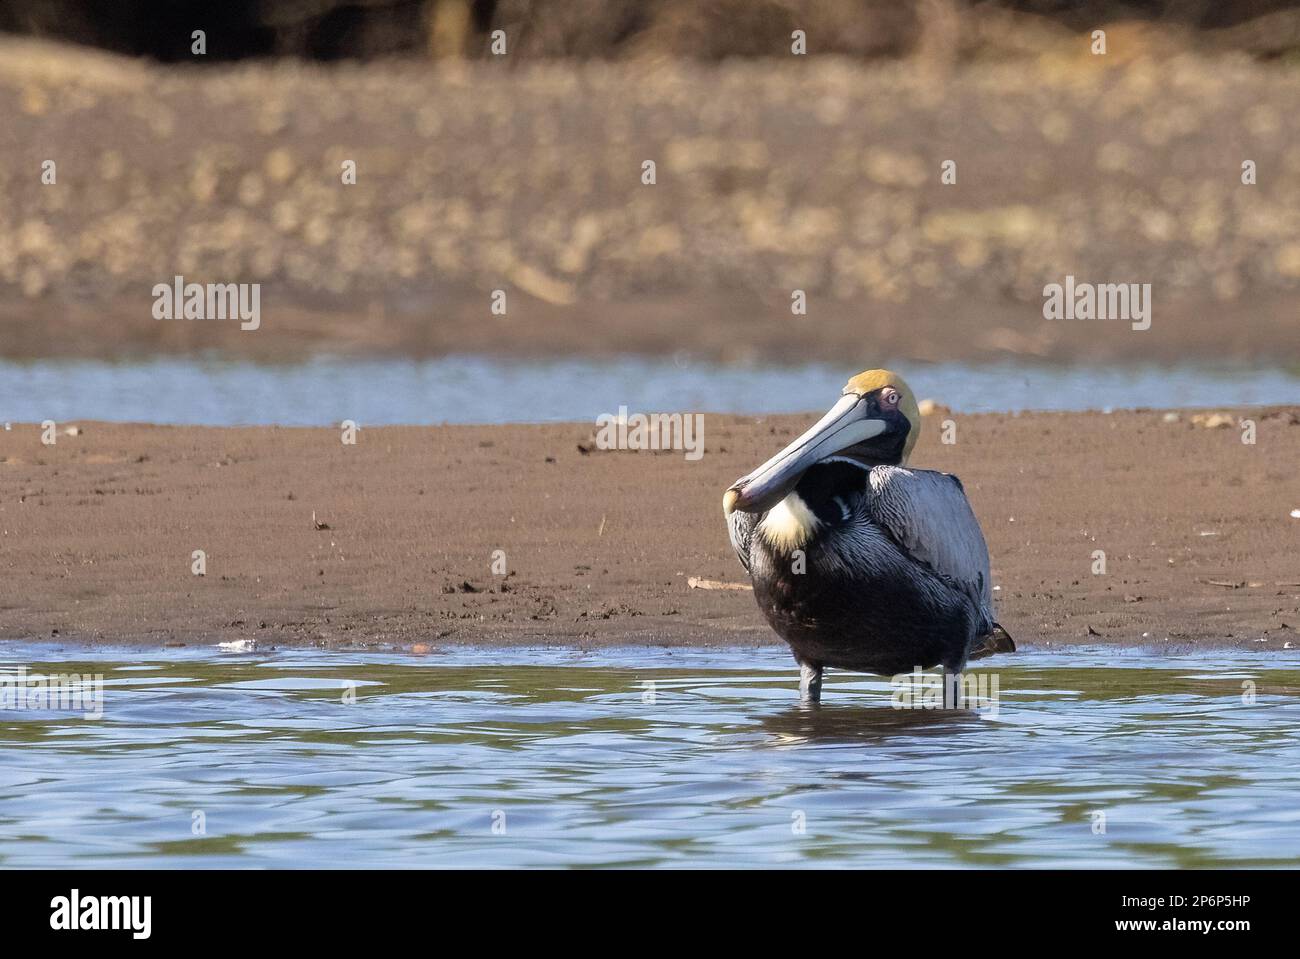 A large Brown Pelican standing in the Tarcoles River in Costa Rica Stock Photo